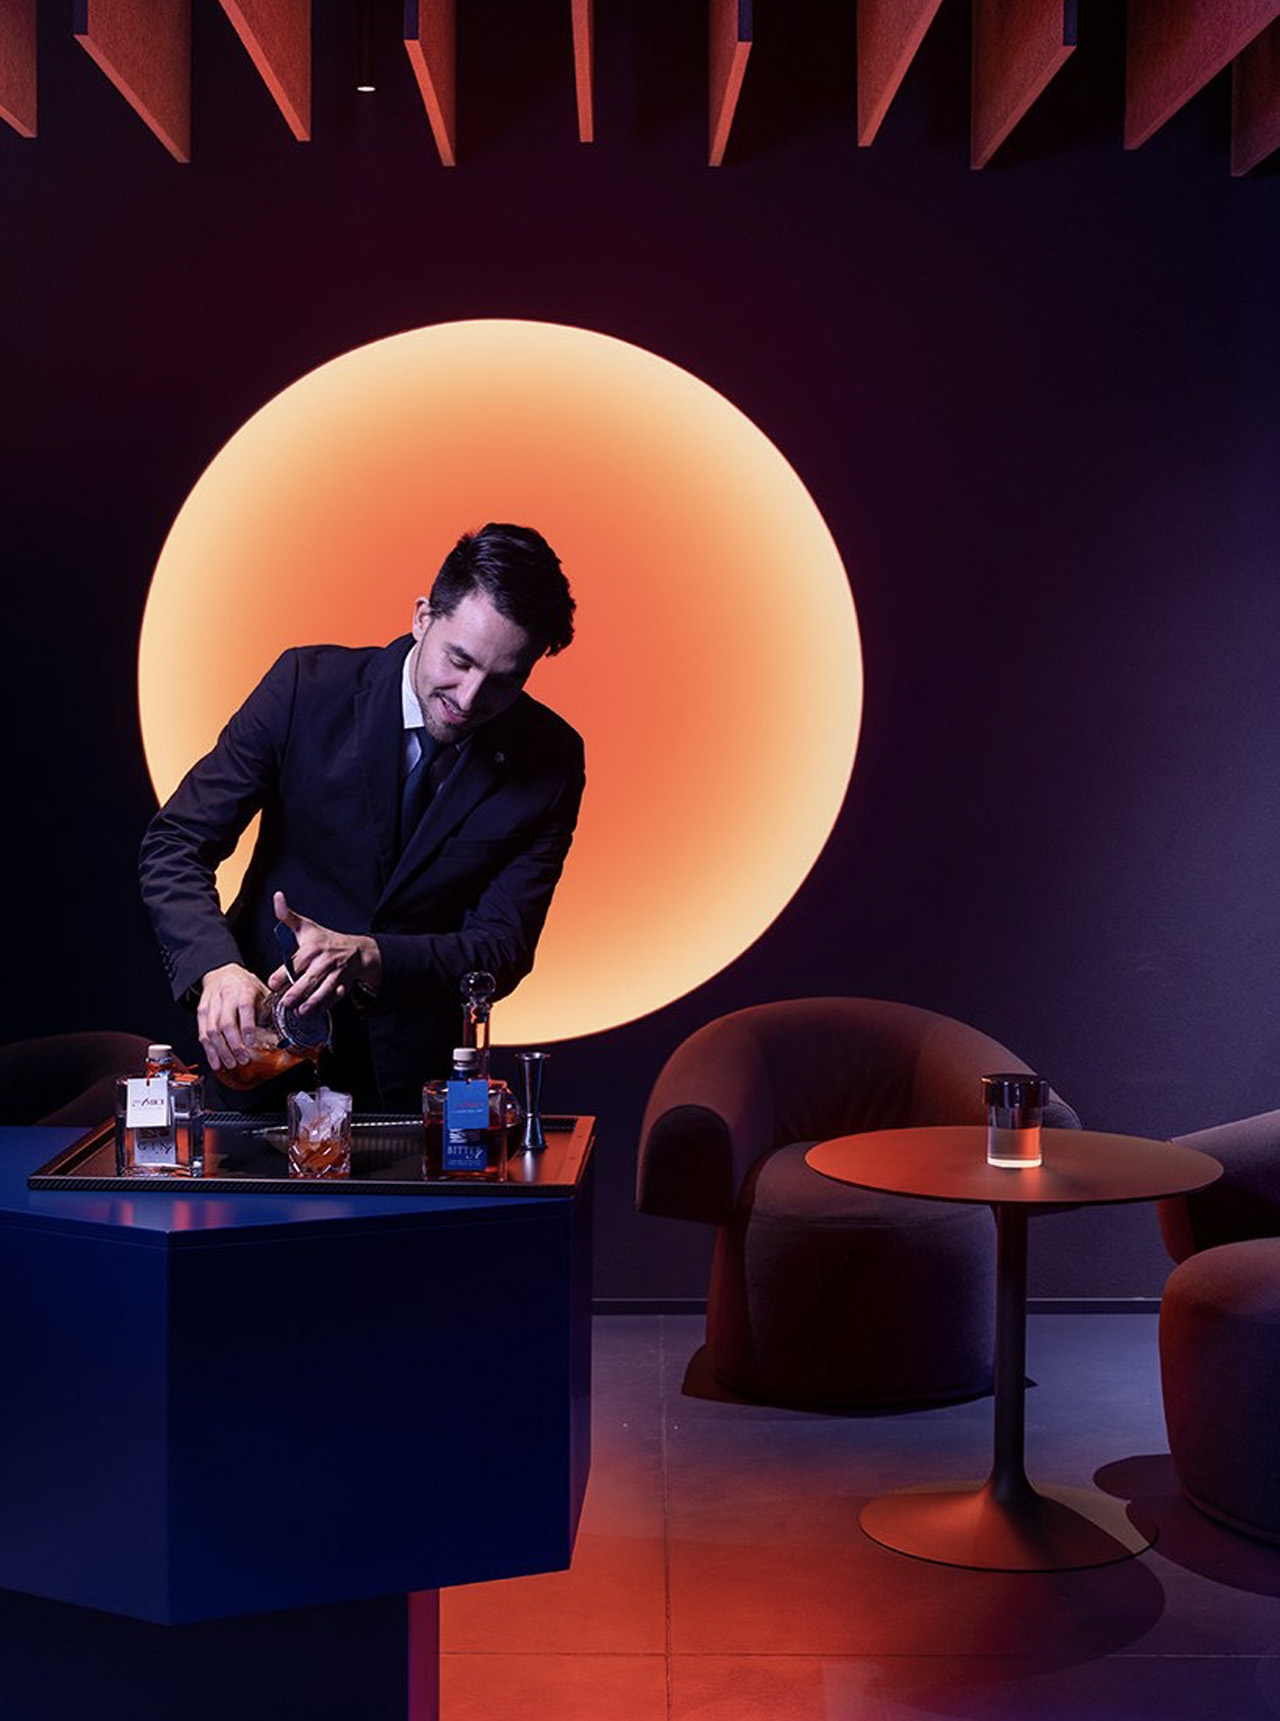 This two Michelin-star restaurant in Italy features a bar lounge immersed in blue and neon orange light